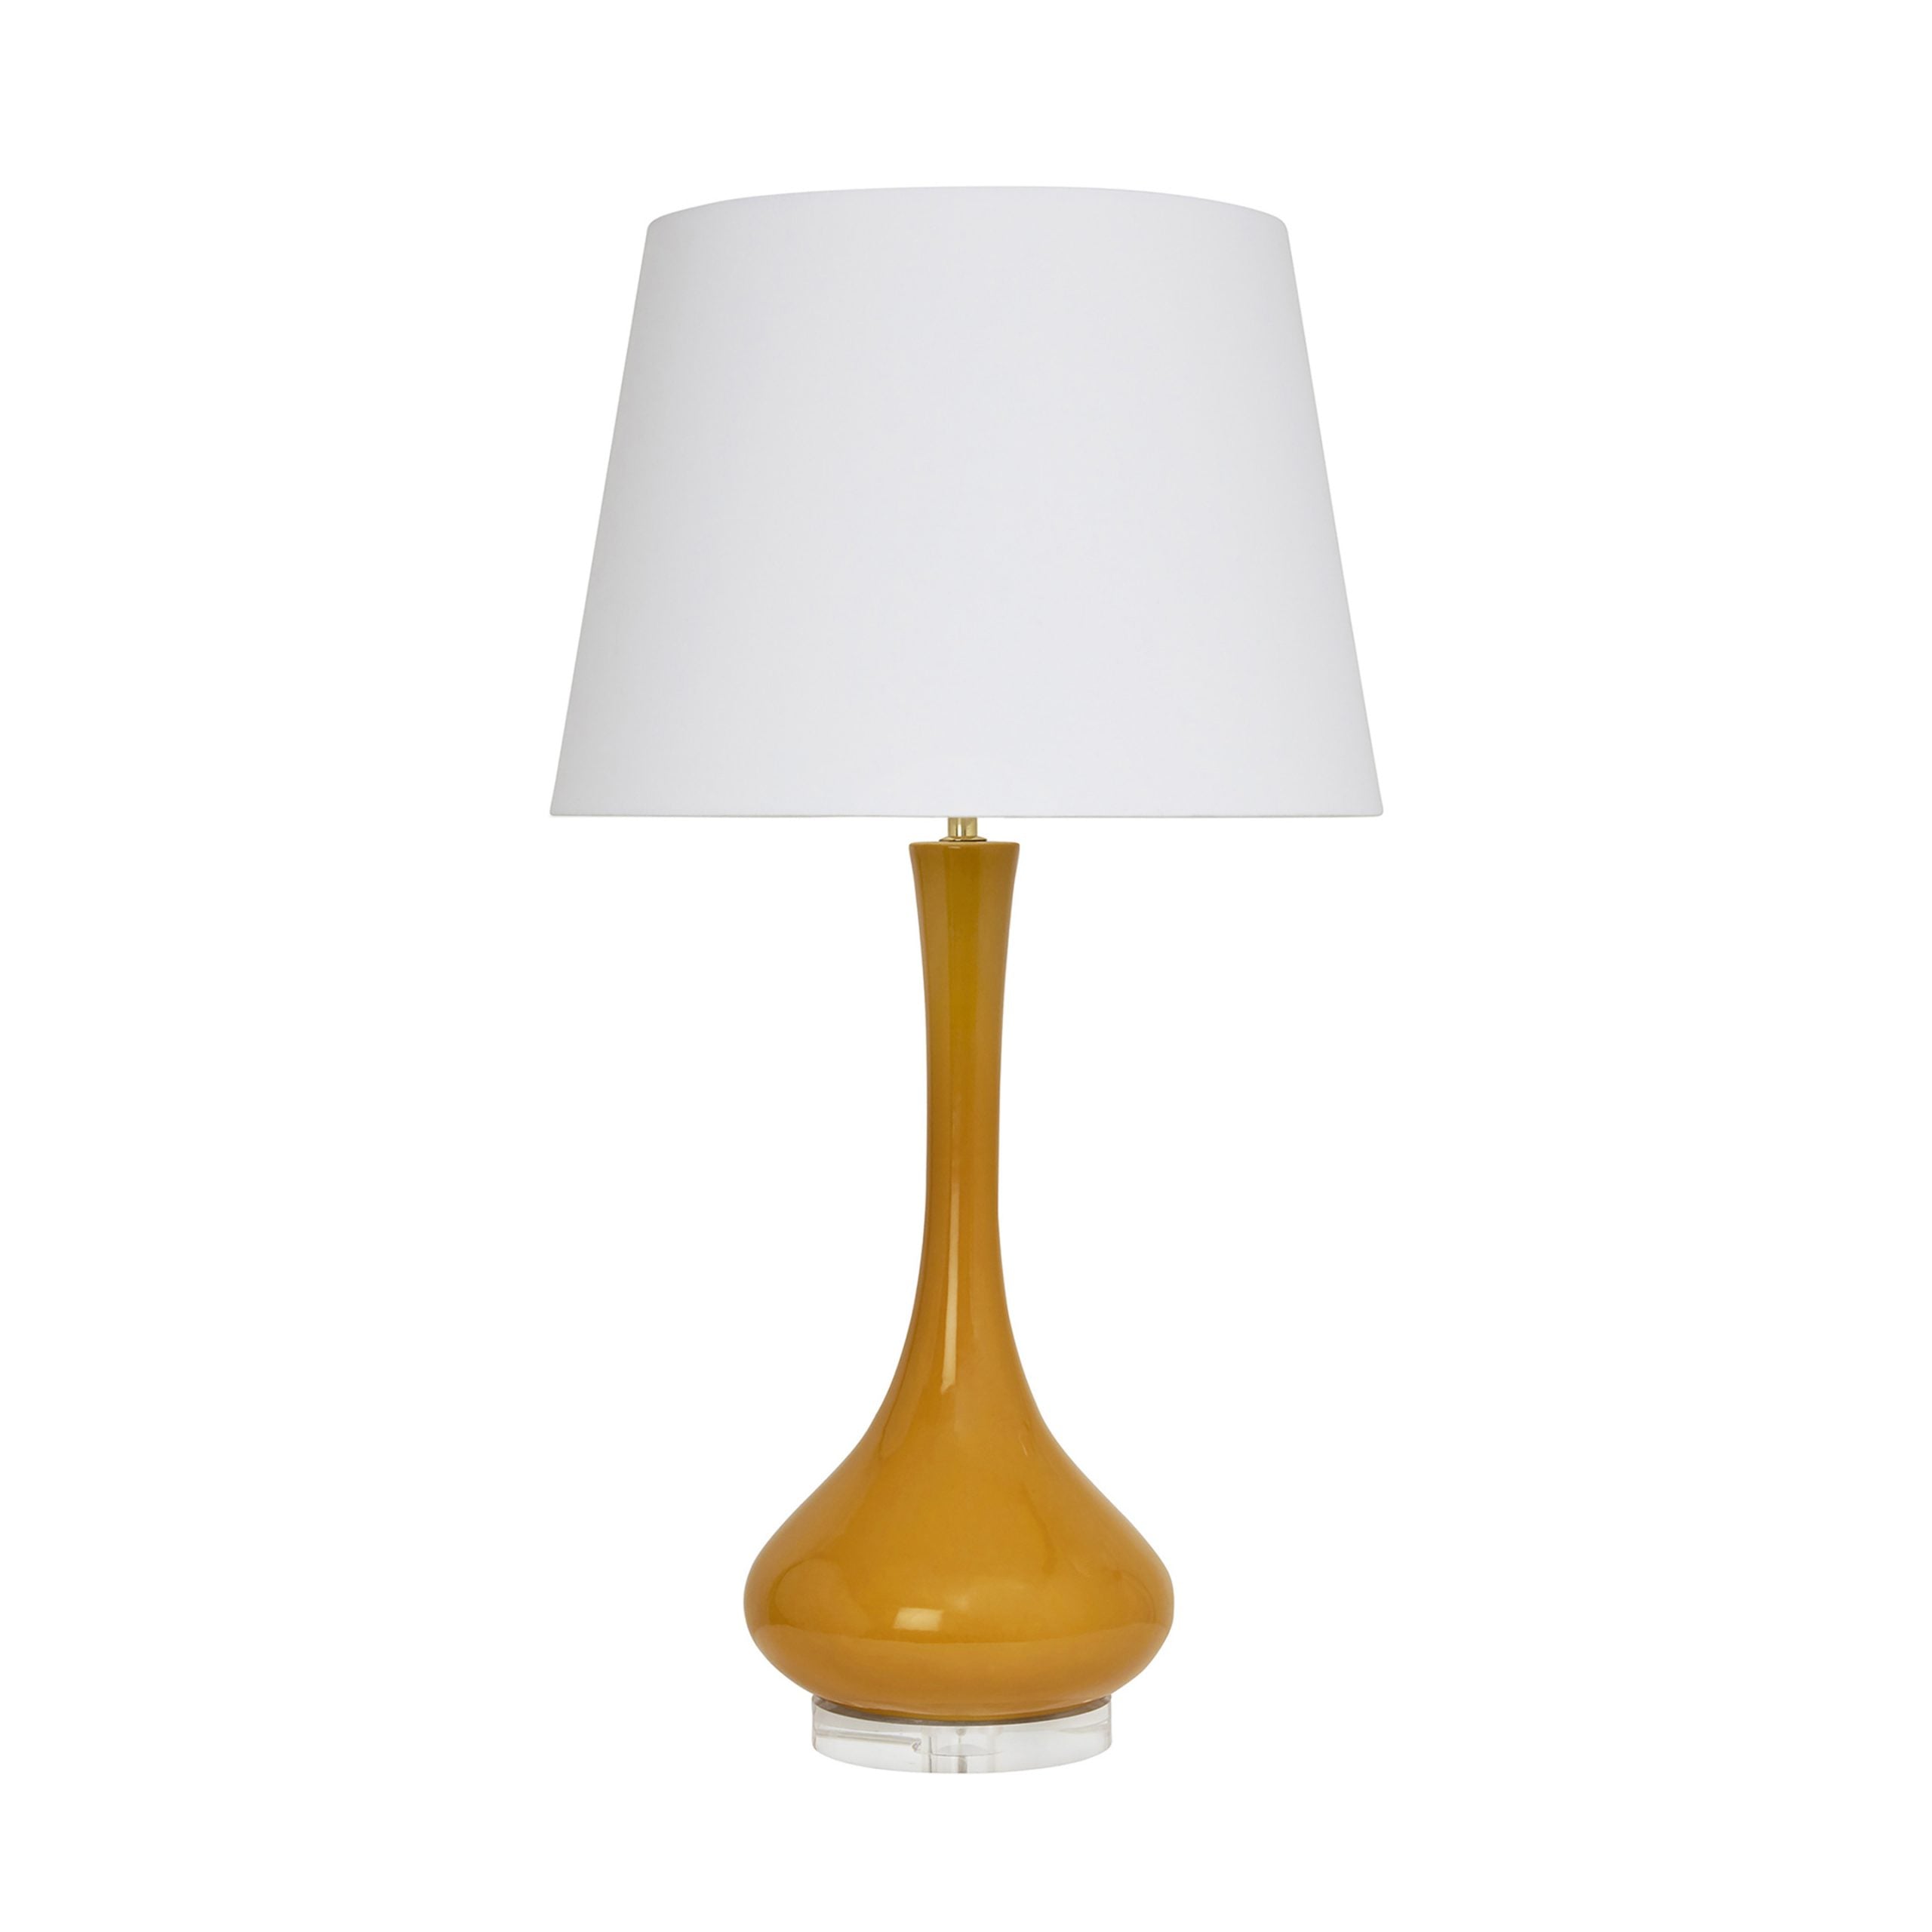 Amelia Table Lamp with Acrylic Base and Empire Shade.